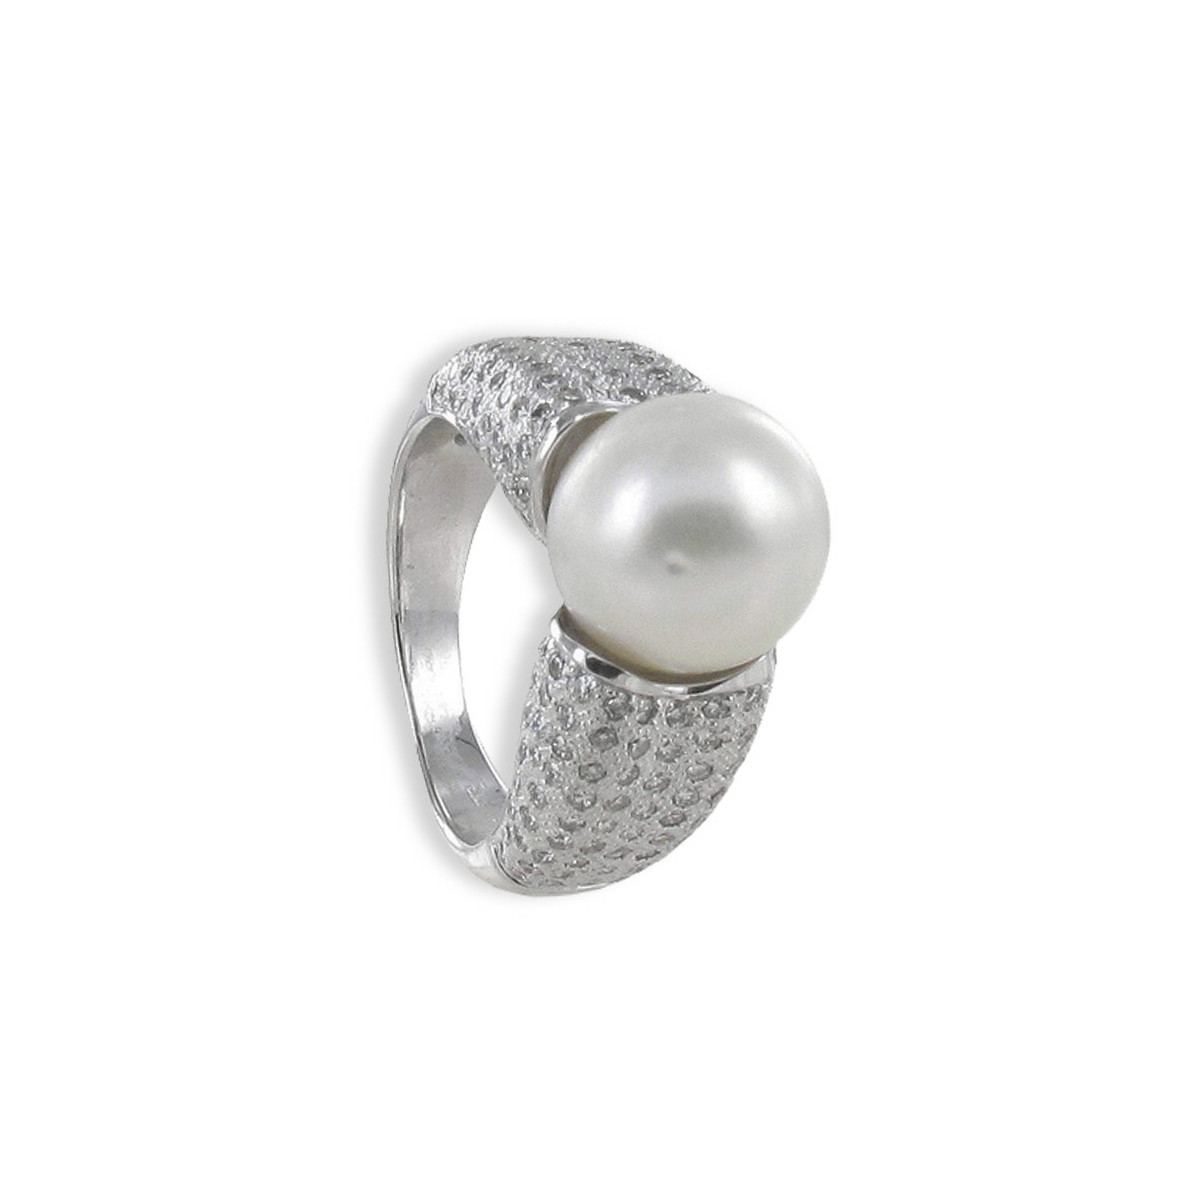 GOLD PEARL AND DIAMONDS RING